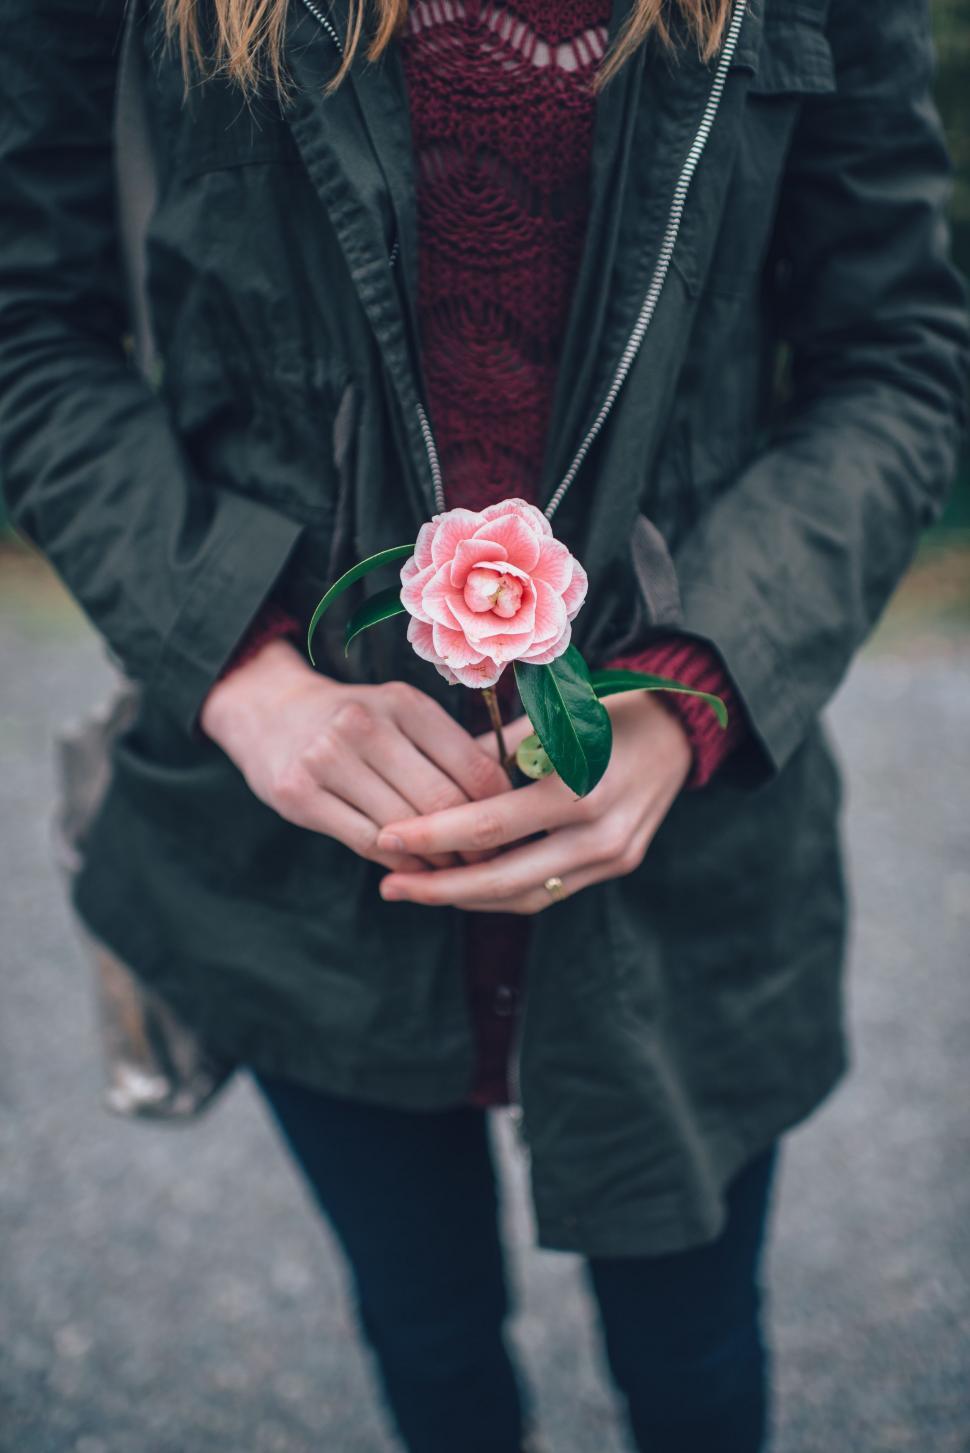 Free Image of Woman Holding a Rose 